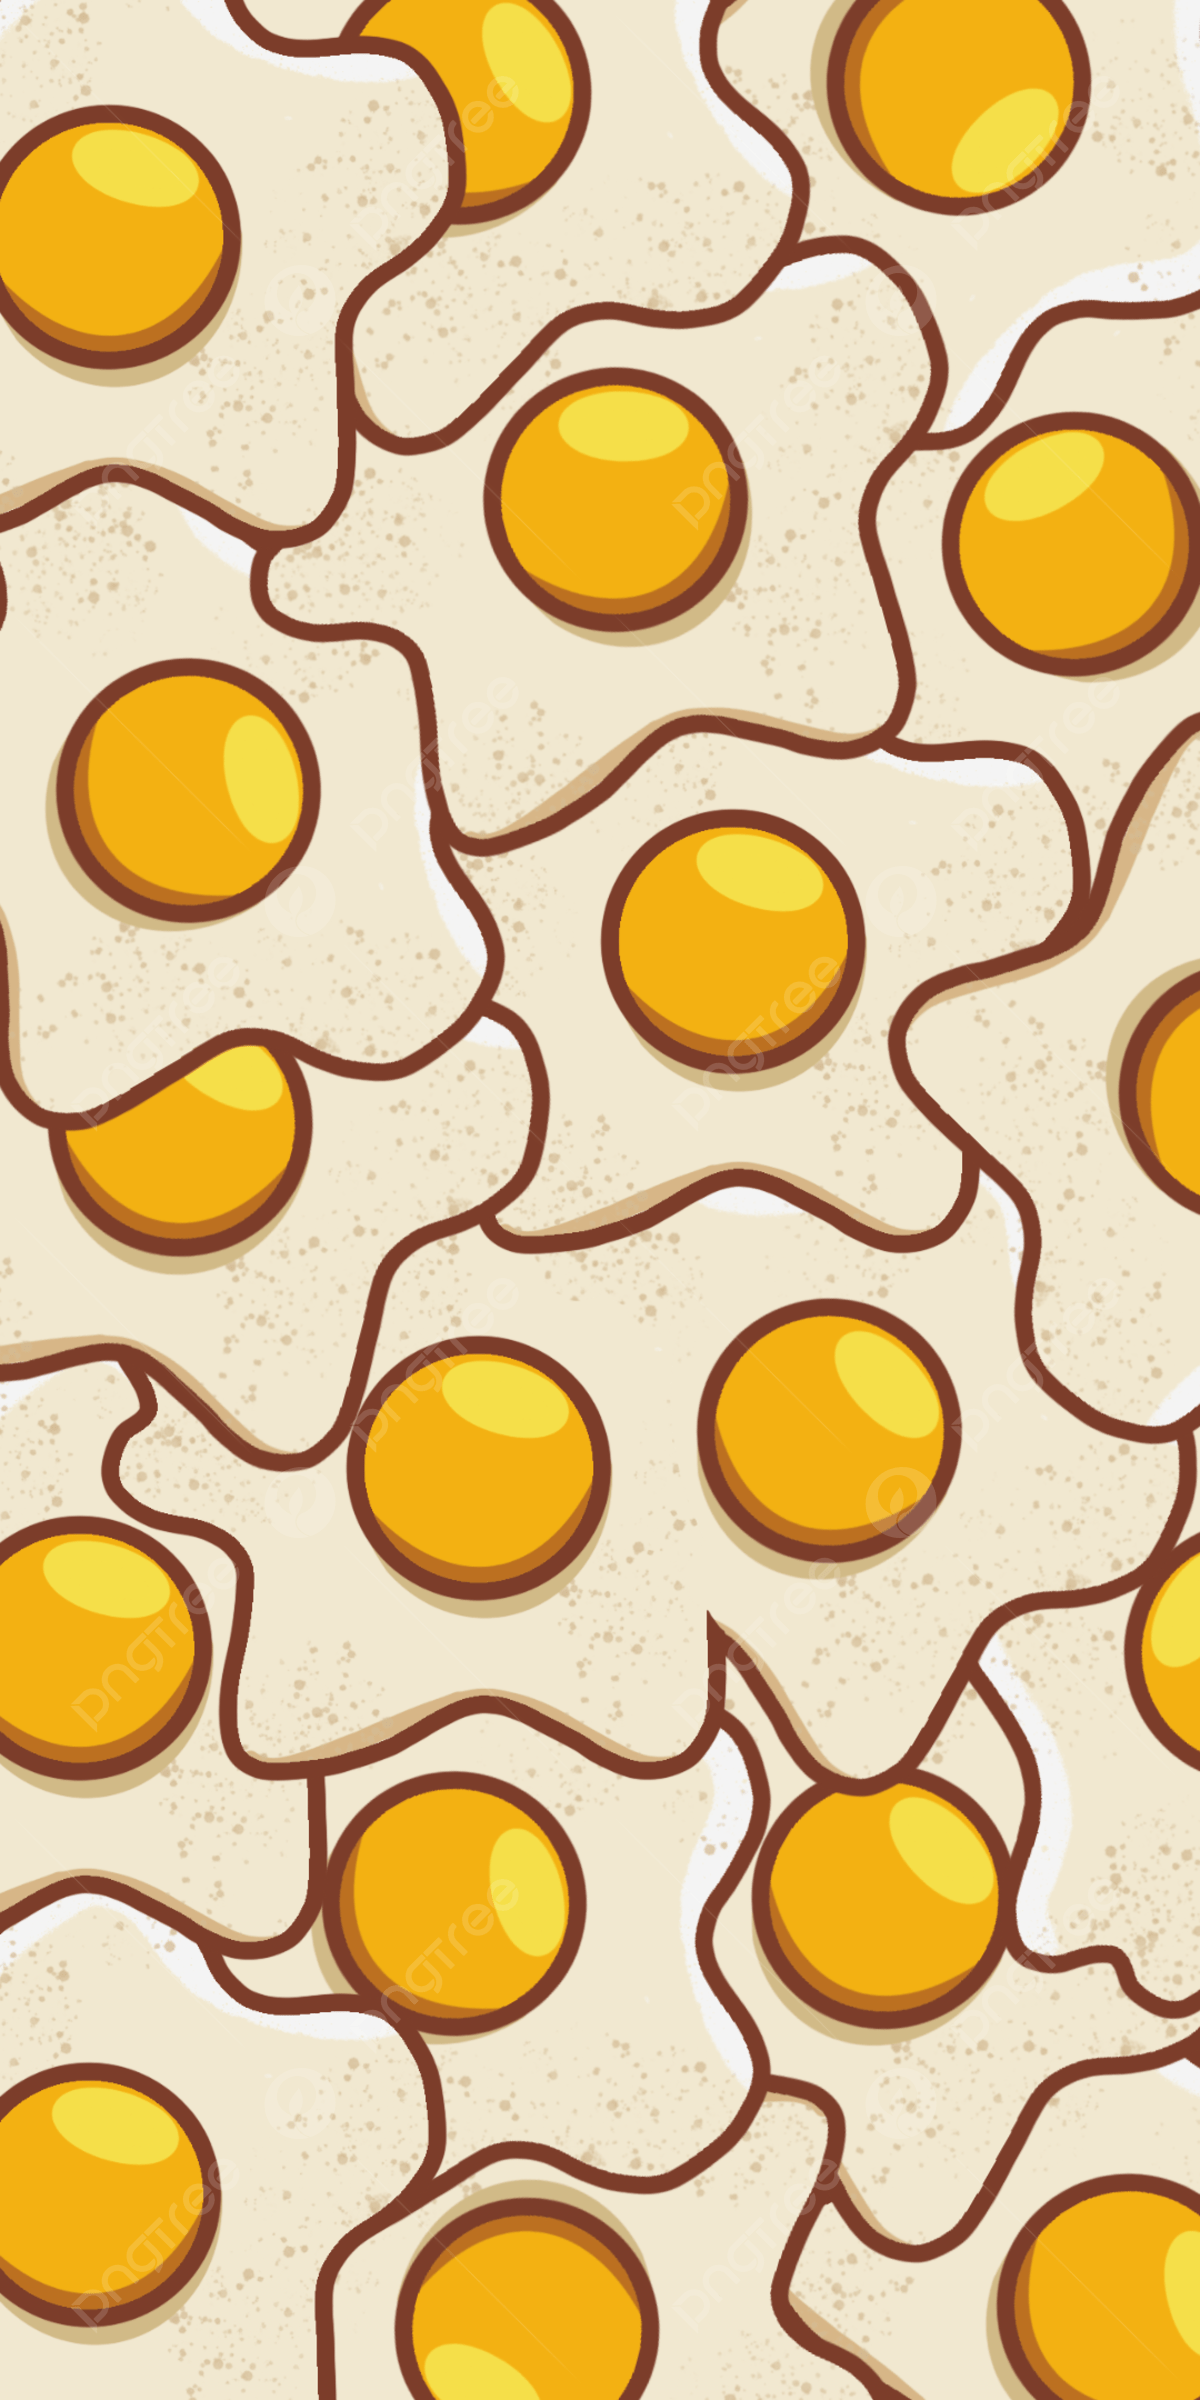 A pattern of fried eggs on a speckled tan background. - Egg